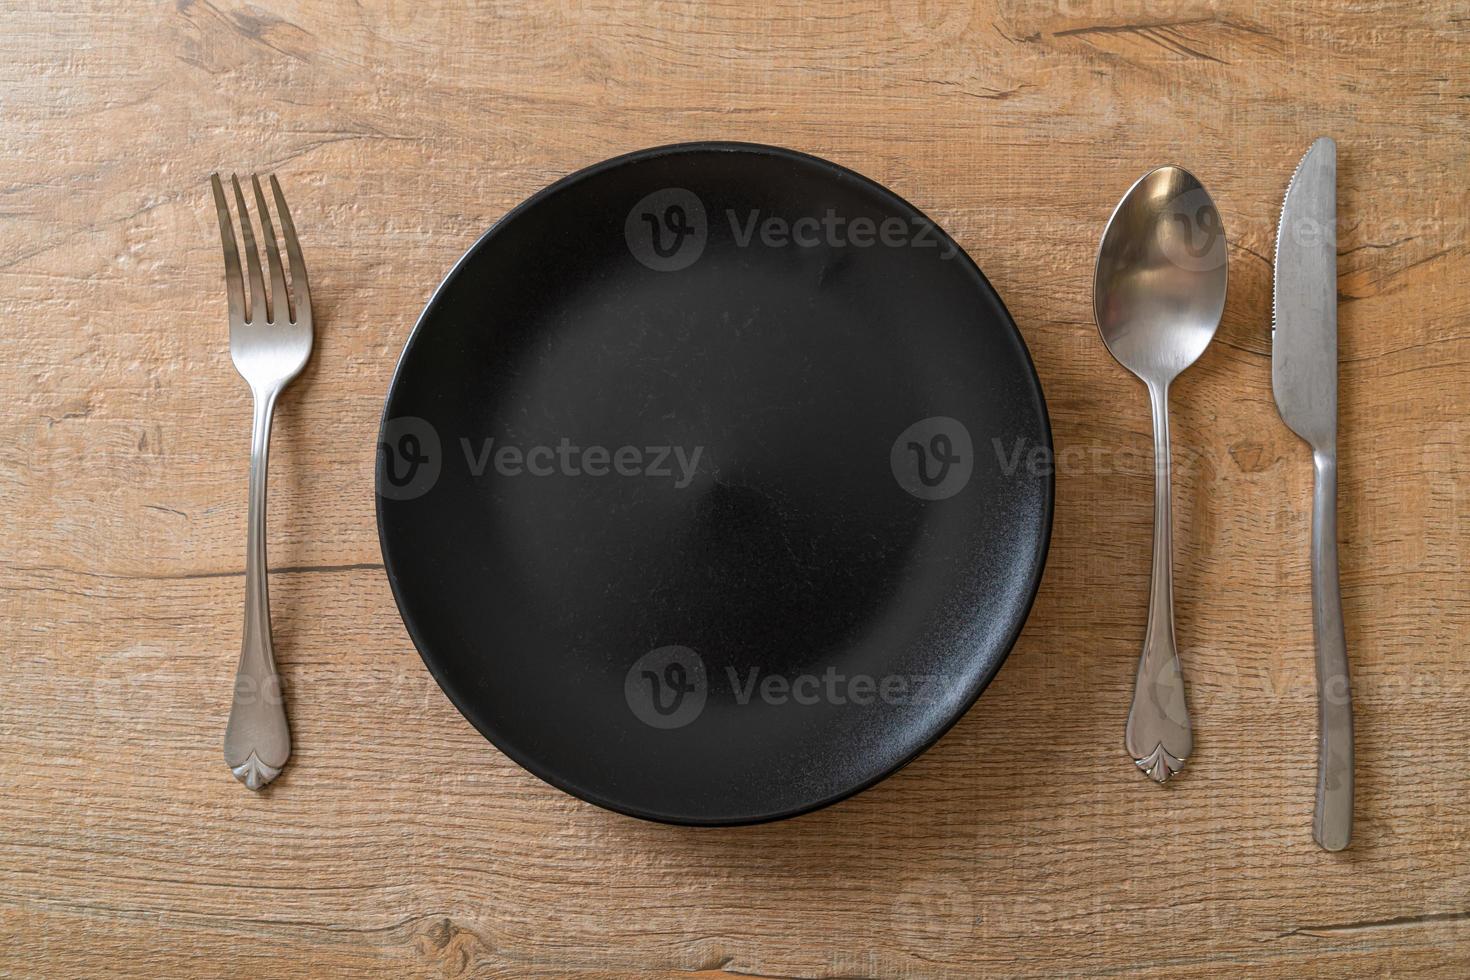 empty plate or dish with knife, fork and spoon photo